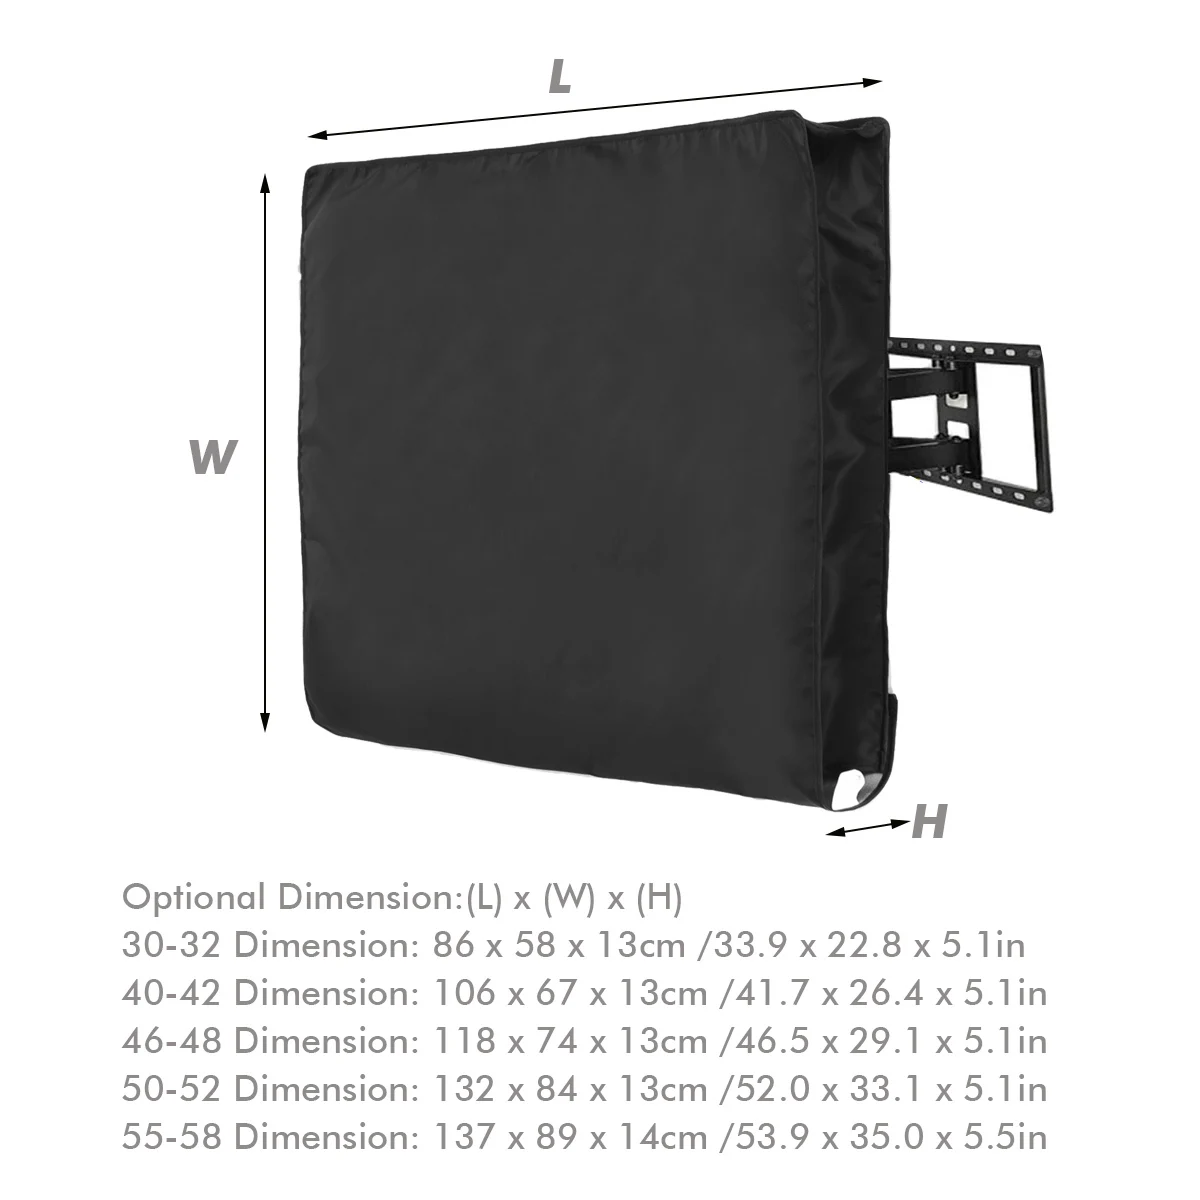 Weatherproof Outdoor TV Cover Protect TV Screen Dustproof Waterproof Cover All-Purpose Dust Cover Television Case for 30